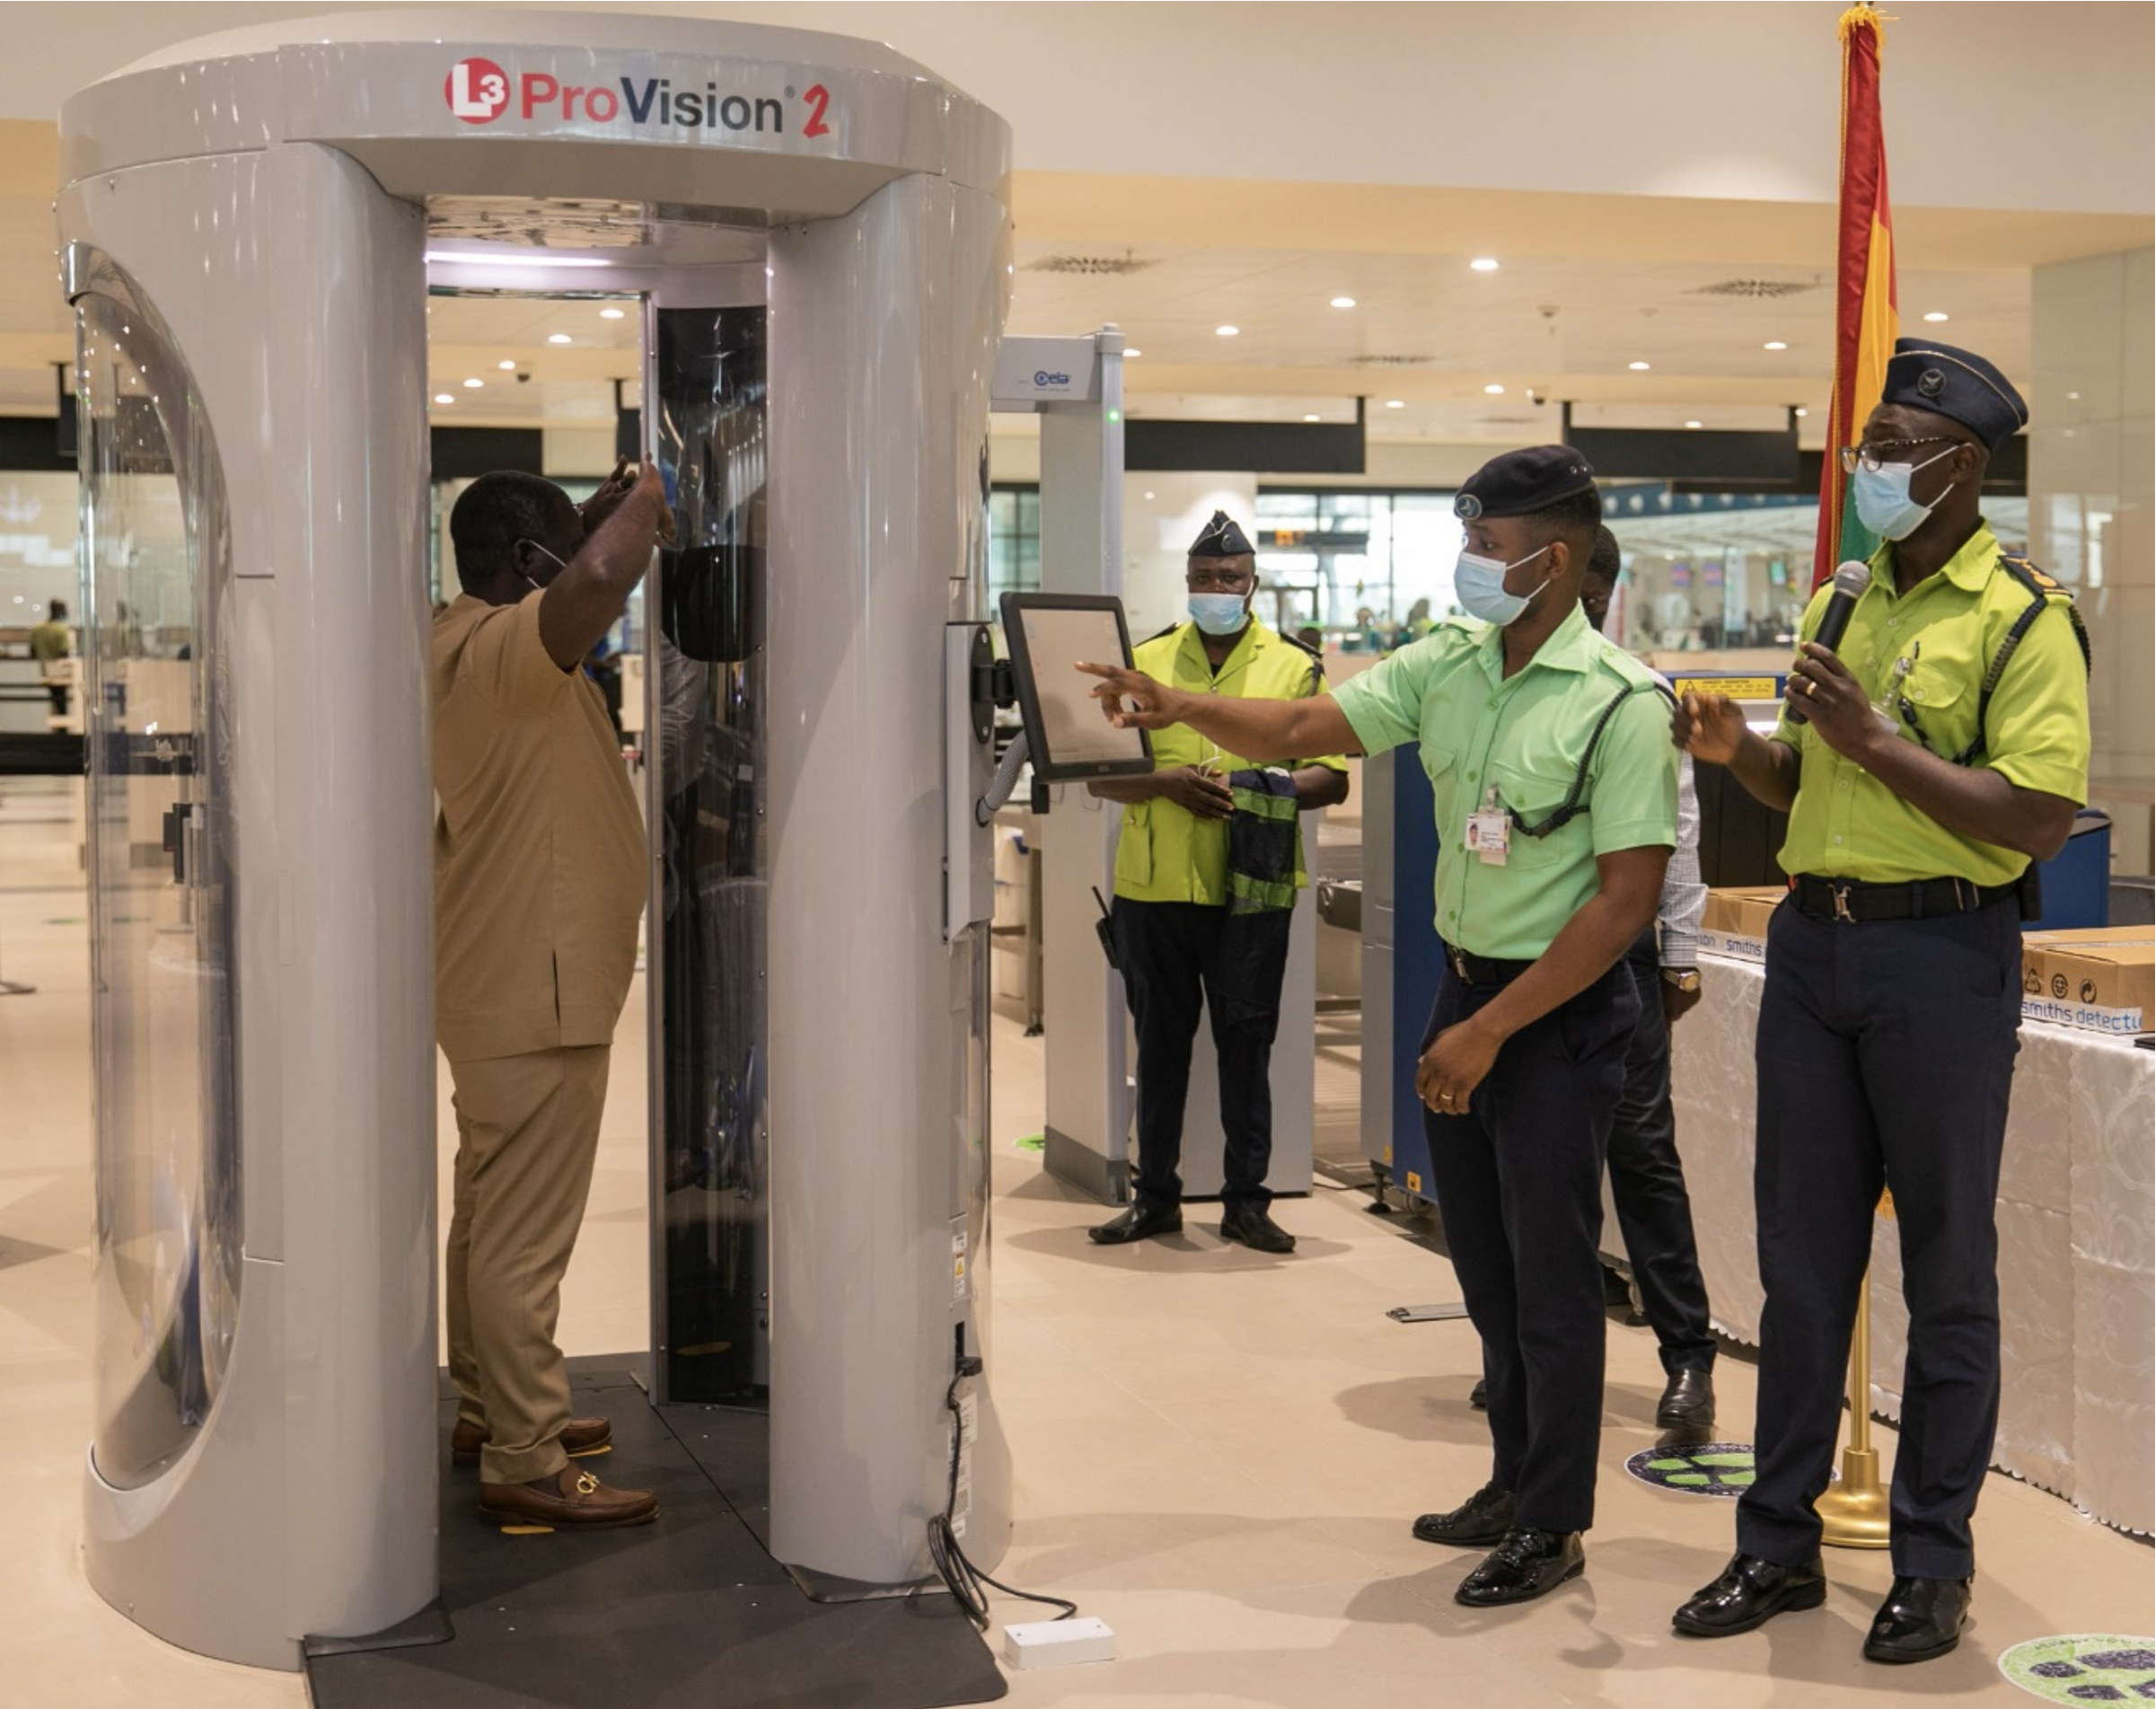 Ghana's Minister of Transport Kwaku Ofori Asiamah tests a body scanner, which is part of aviation security equipment presented to authorities of the Kotoka International Airport on March 23, 2021, as part of an ATA equipment grant. (U.S. Department of State photo)